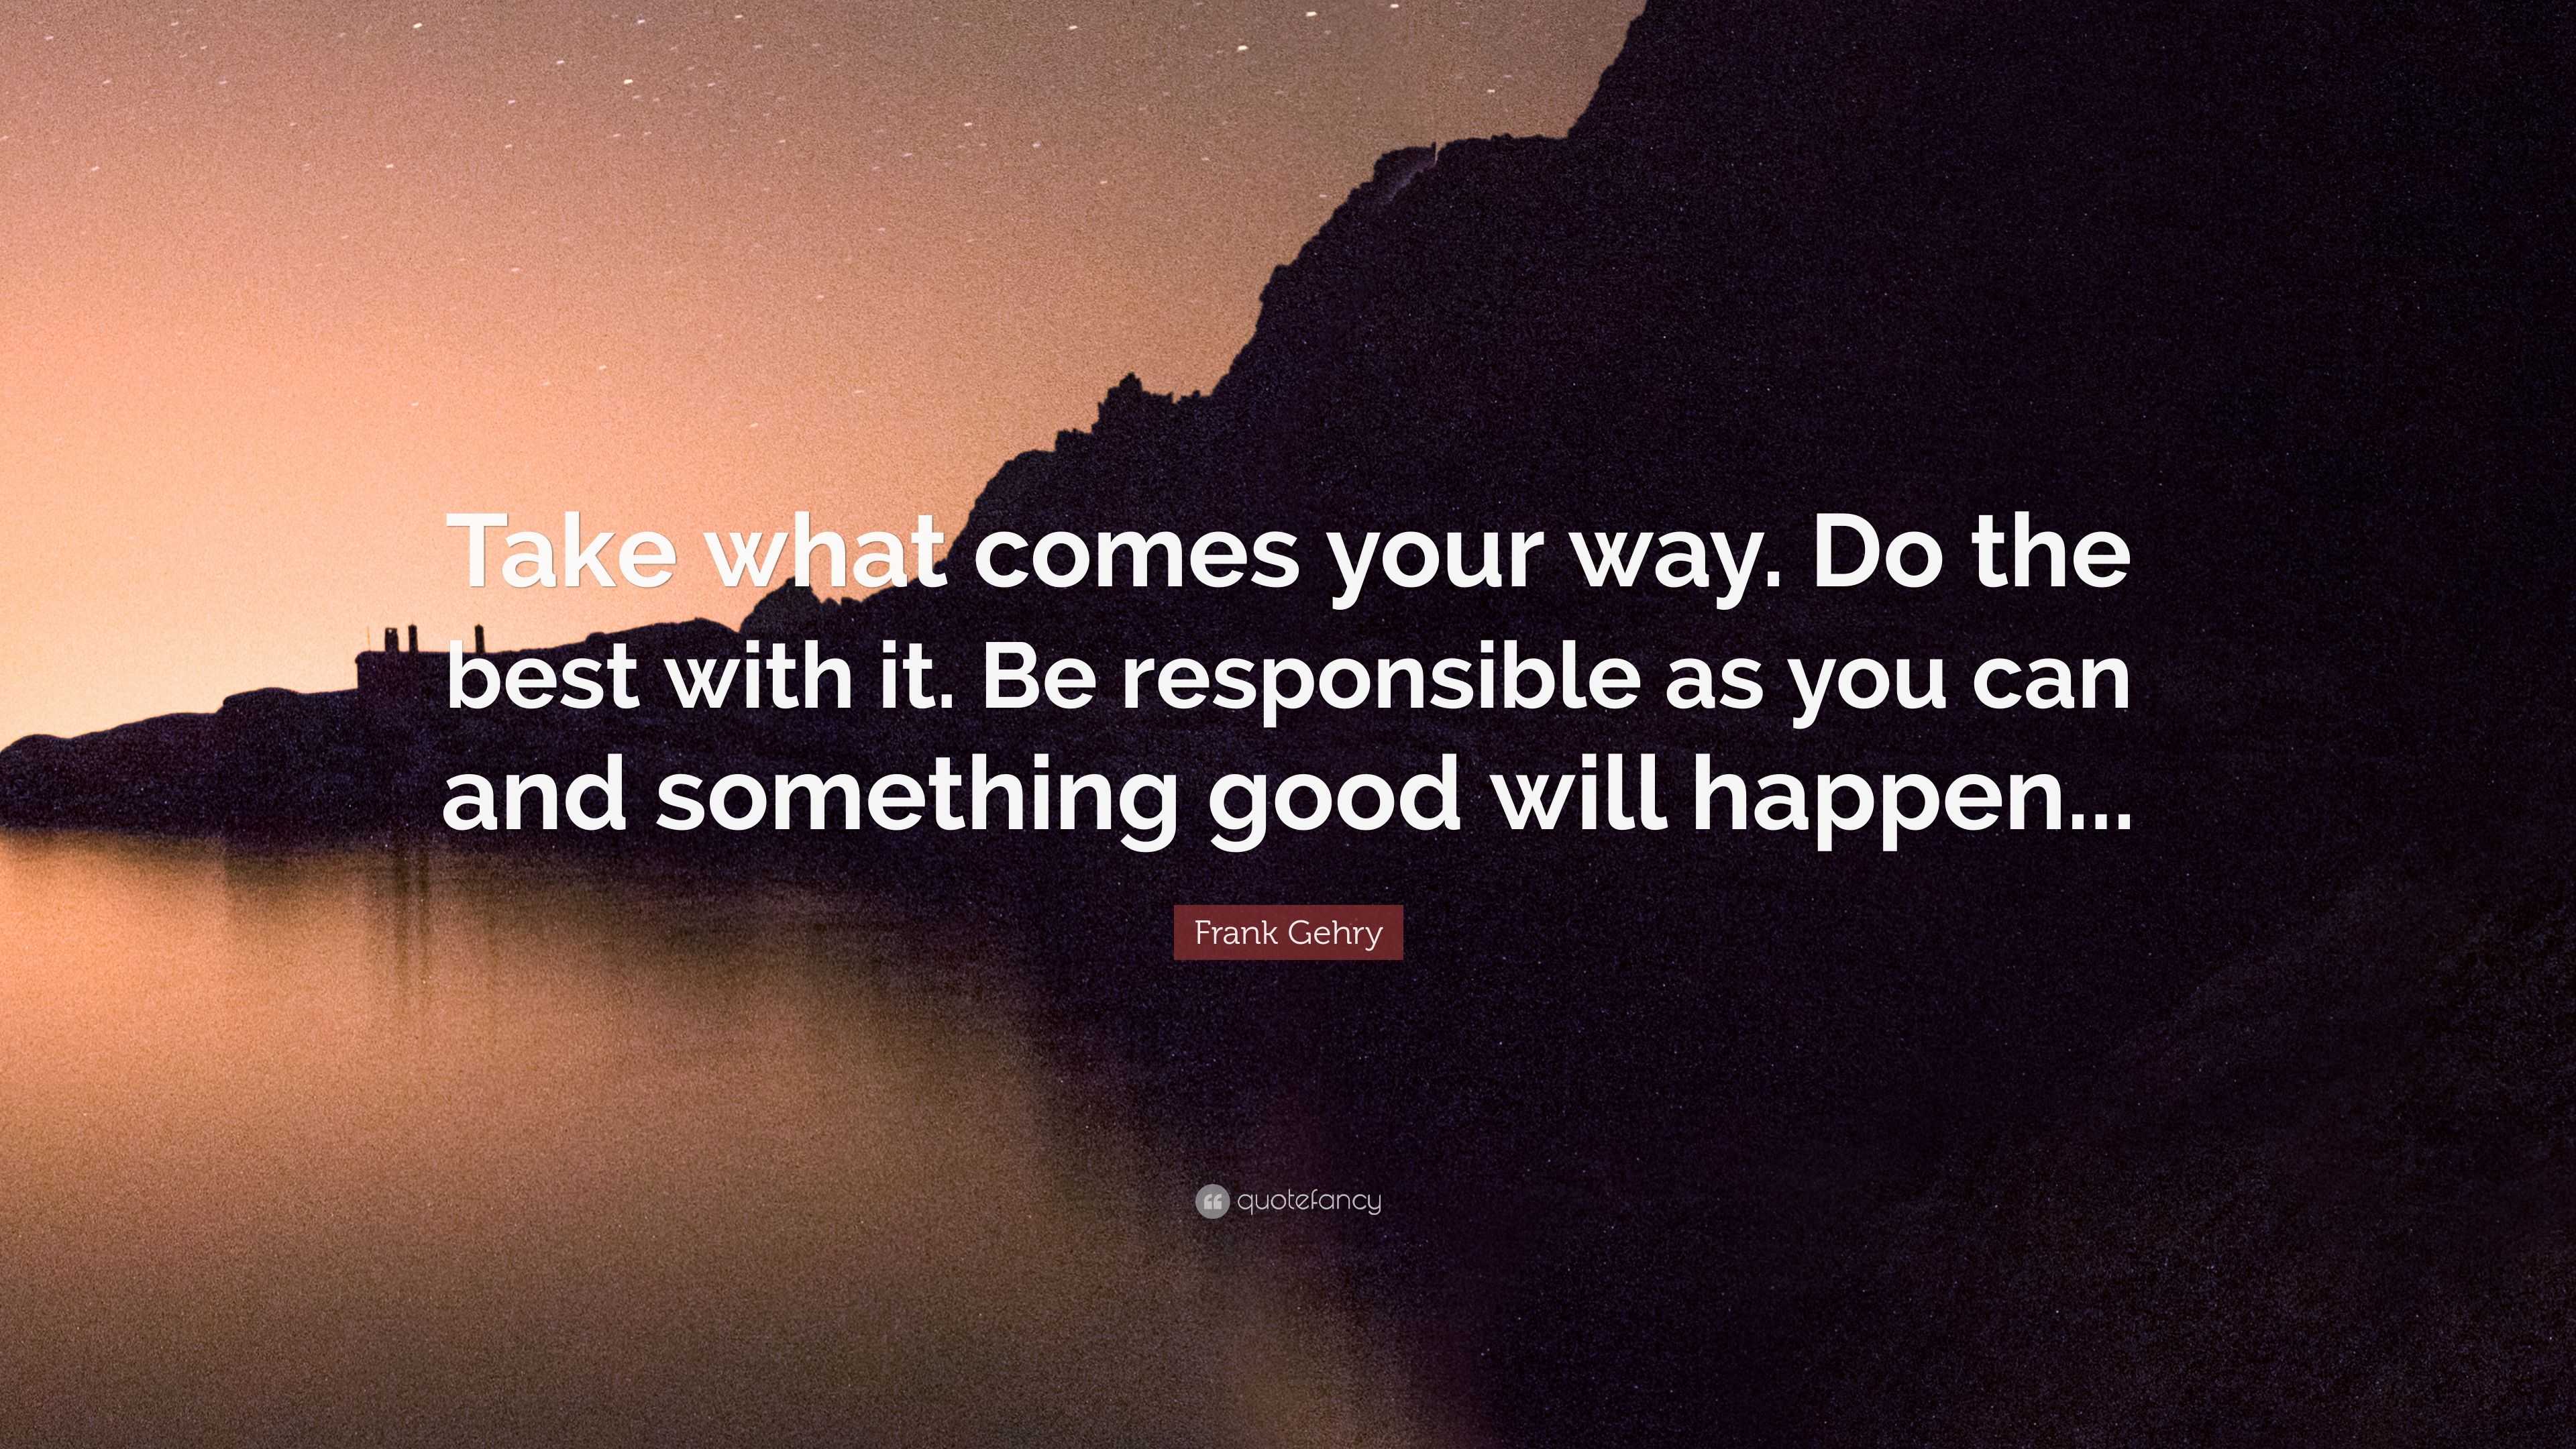 Frank Gehry Quote Take What Comes Your Way Do The Best With It Be Responsible As